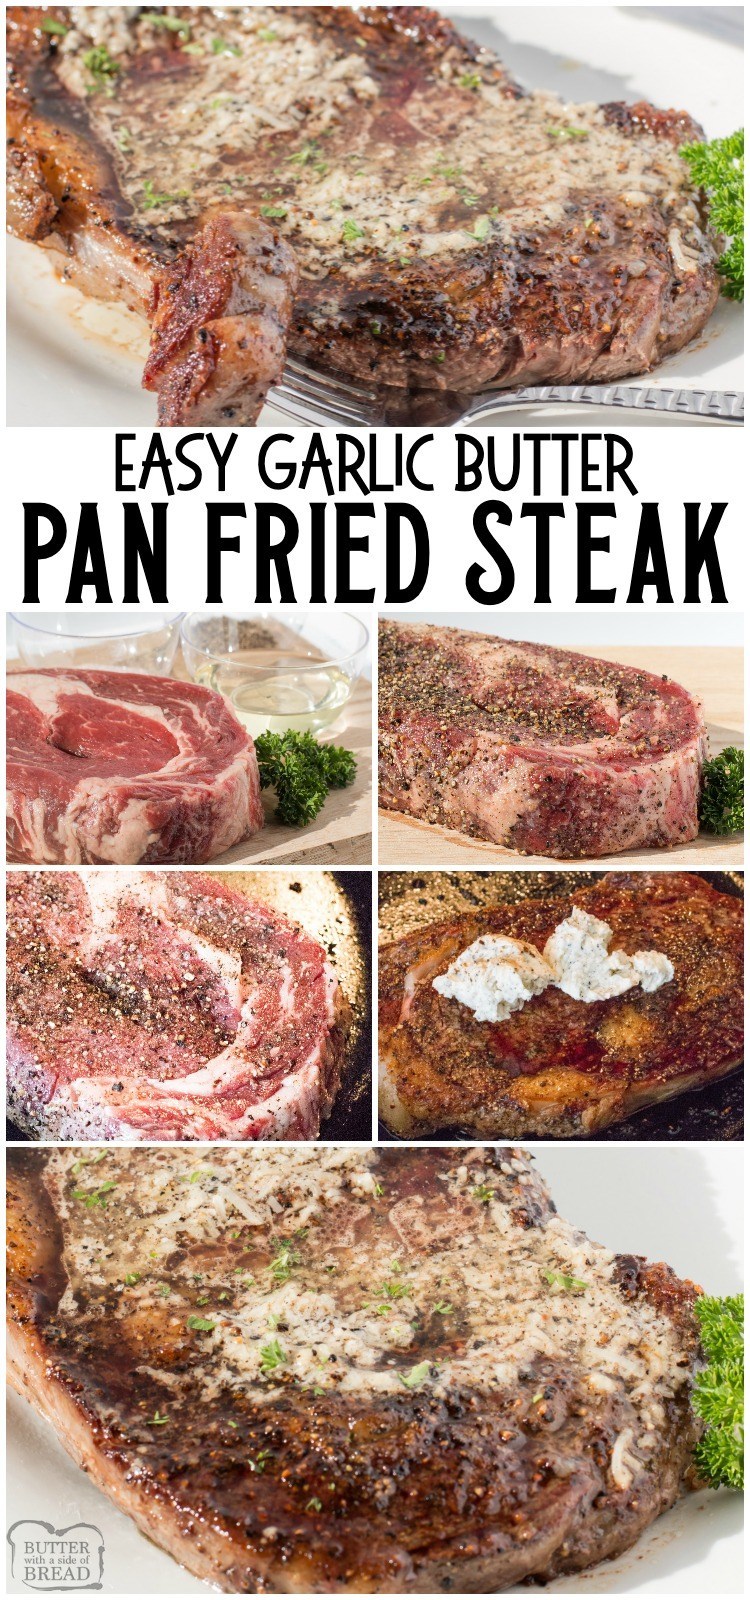 Simple recipe for Pan-Fried Steak topped with garlic butter that everyone raves about! Done in 15 minutes & easily the BEST recipe for steak cooked on a stove EVER. #steak #fried #stovetop #beef #dinner #butter #garlic #protein #recipe from BUTTER WITH A SIDE OF BREAD